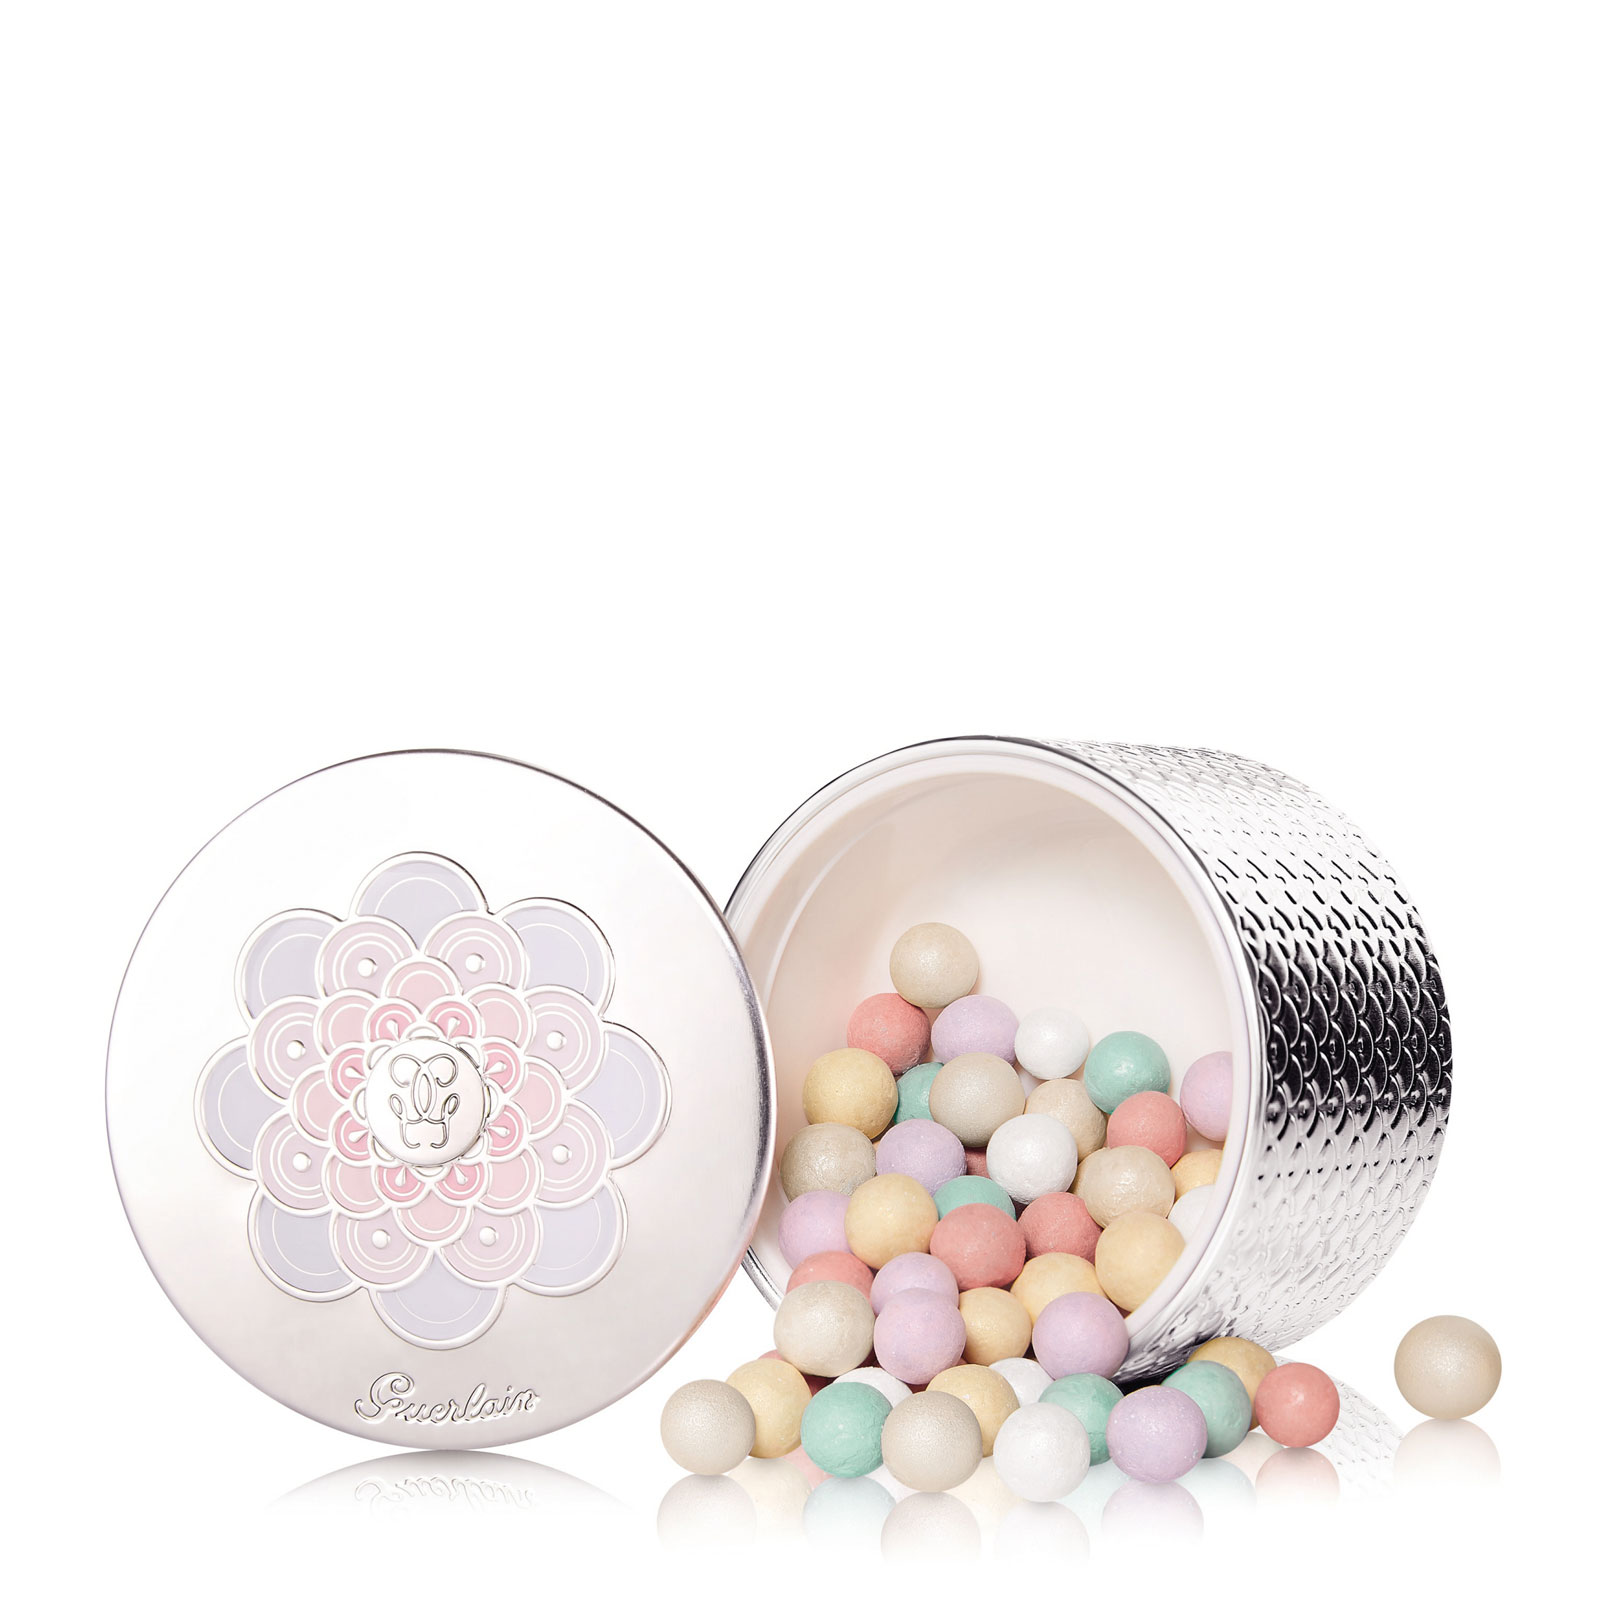 Guerlain Meteorites Blossom Collection: Meteorites Pearls 25G 02 Clair